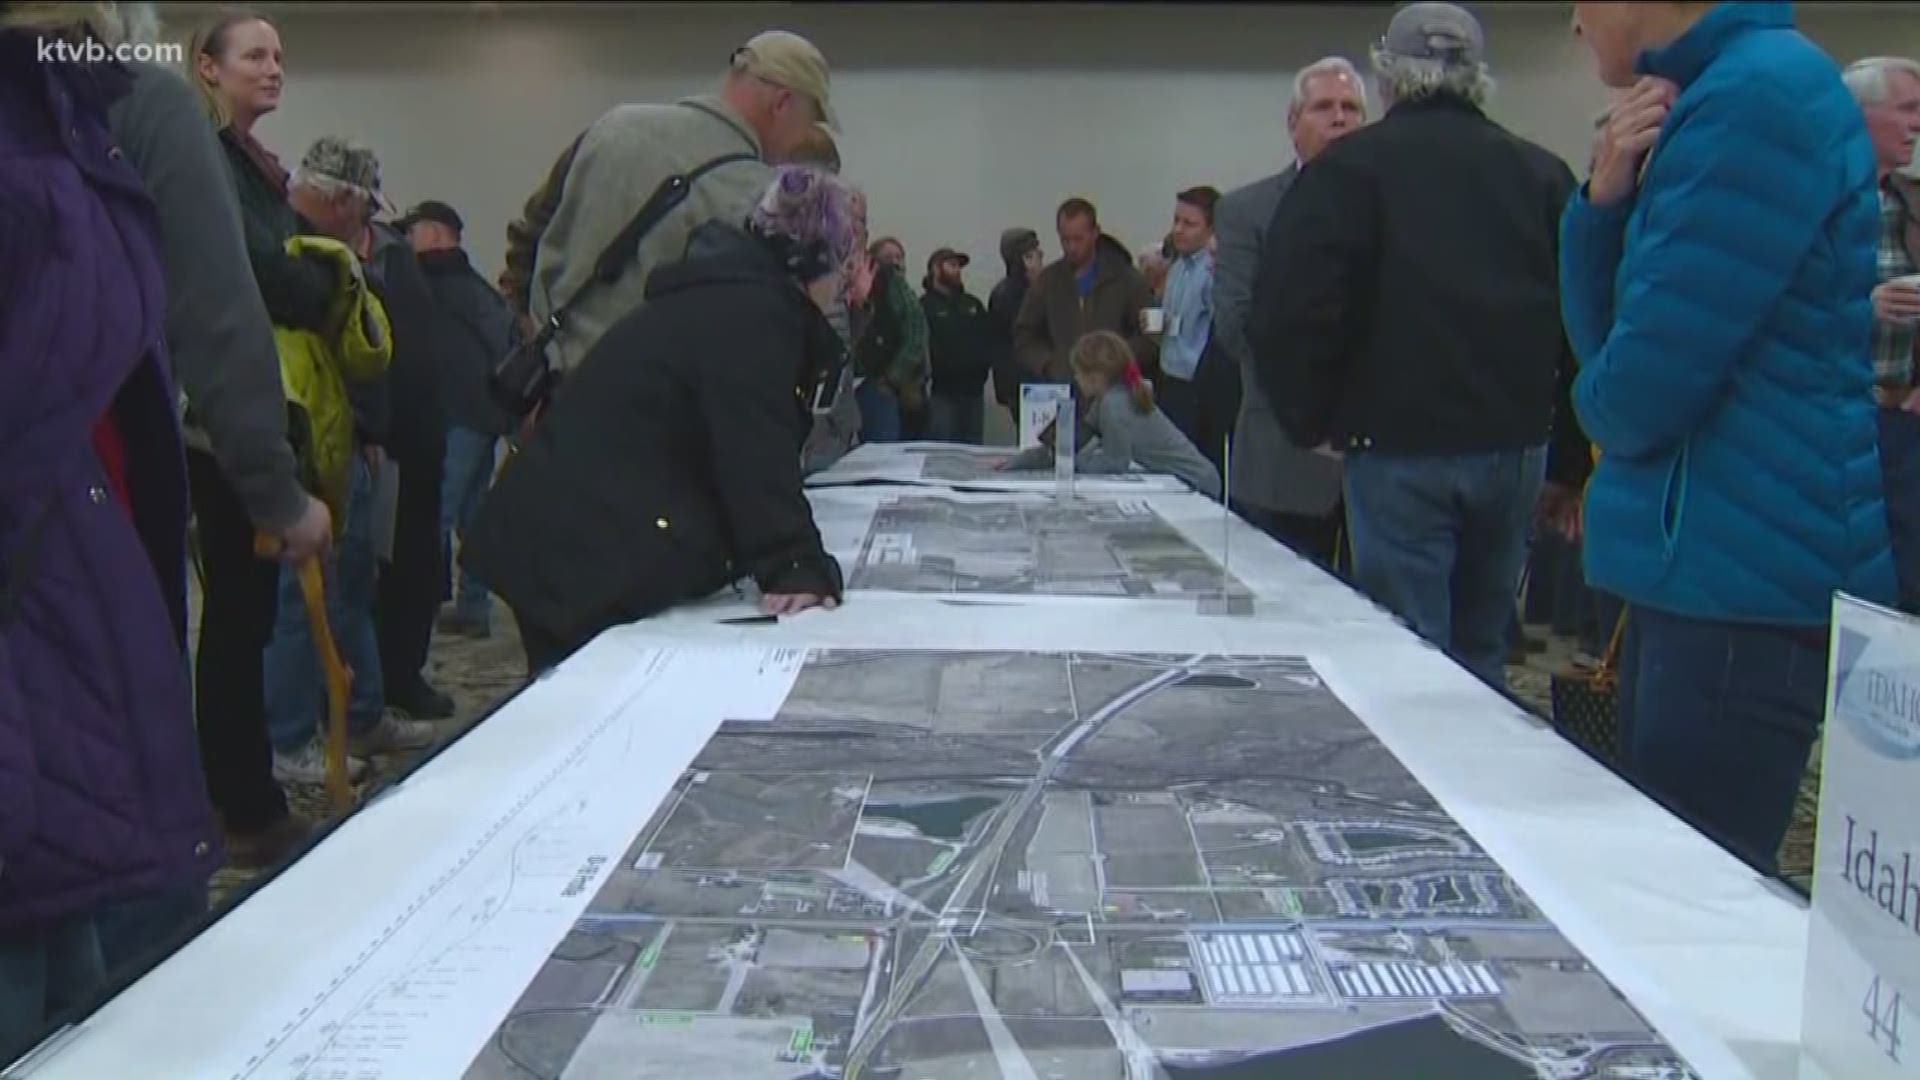 If the proposal goes through, Highway 16 would be extended all the way to Interstate 84. The public had a chance to weigh in on the plan.